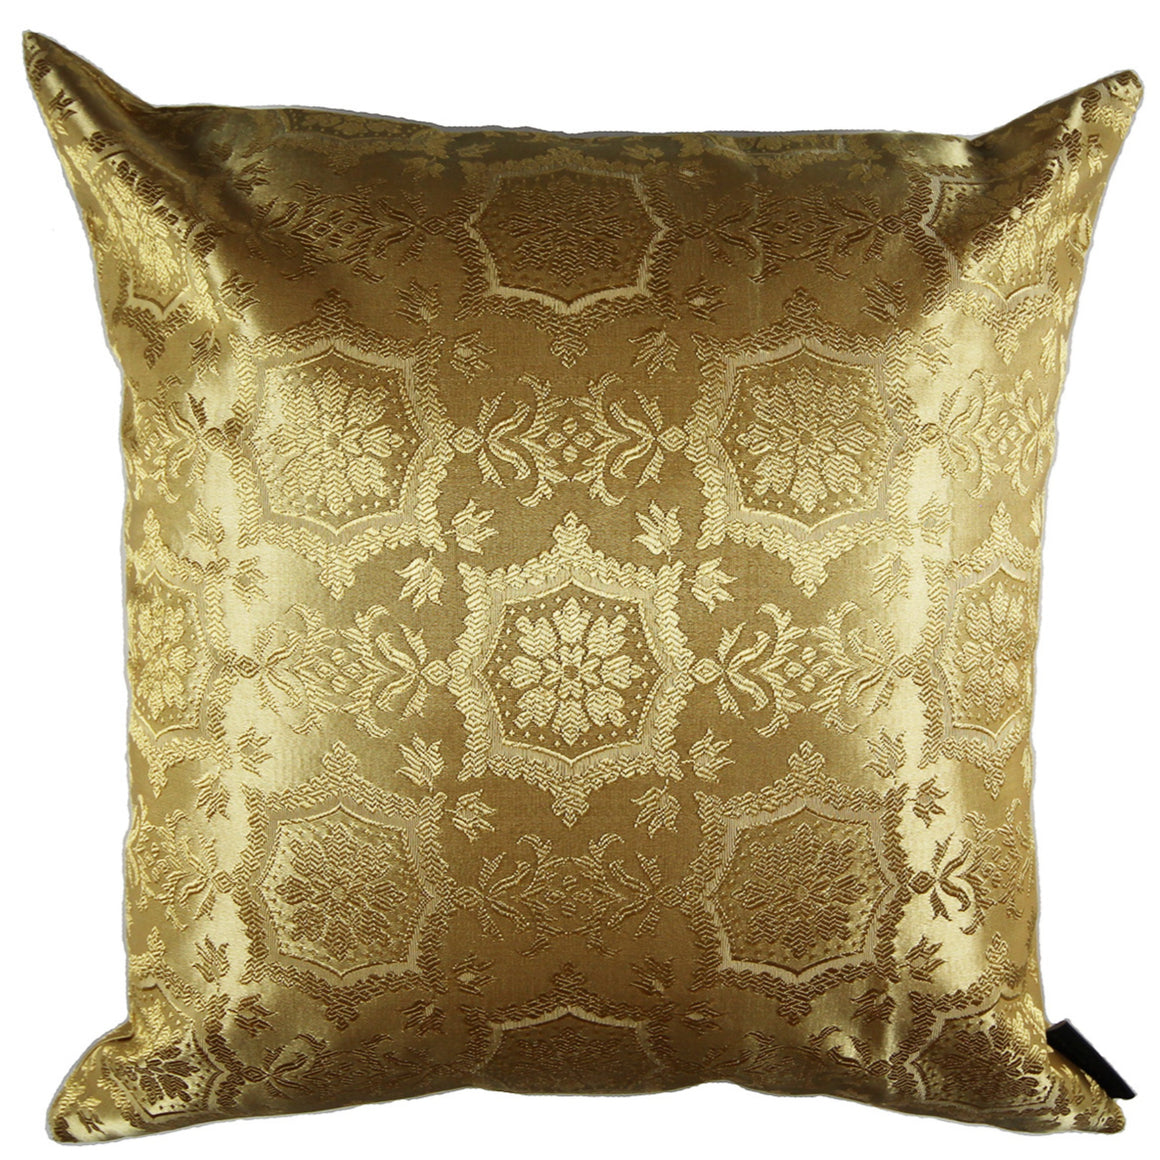 Goldy - Yellow Gold Royal Pillow Cover - 20x20